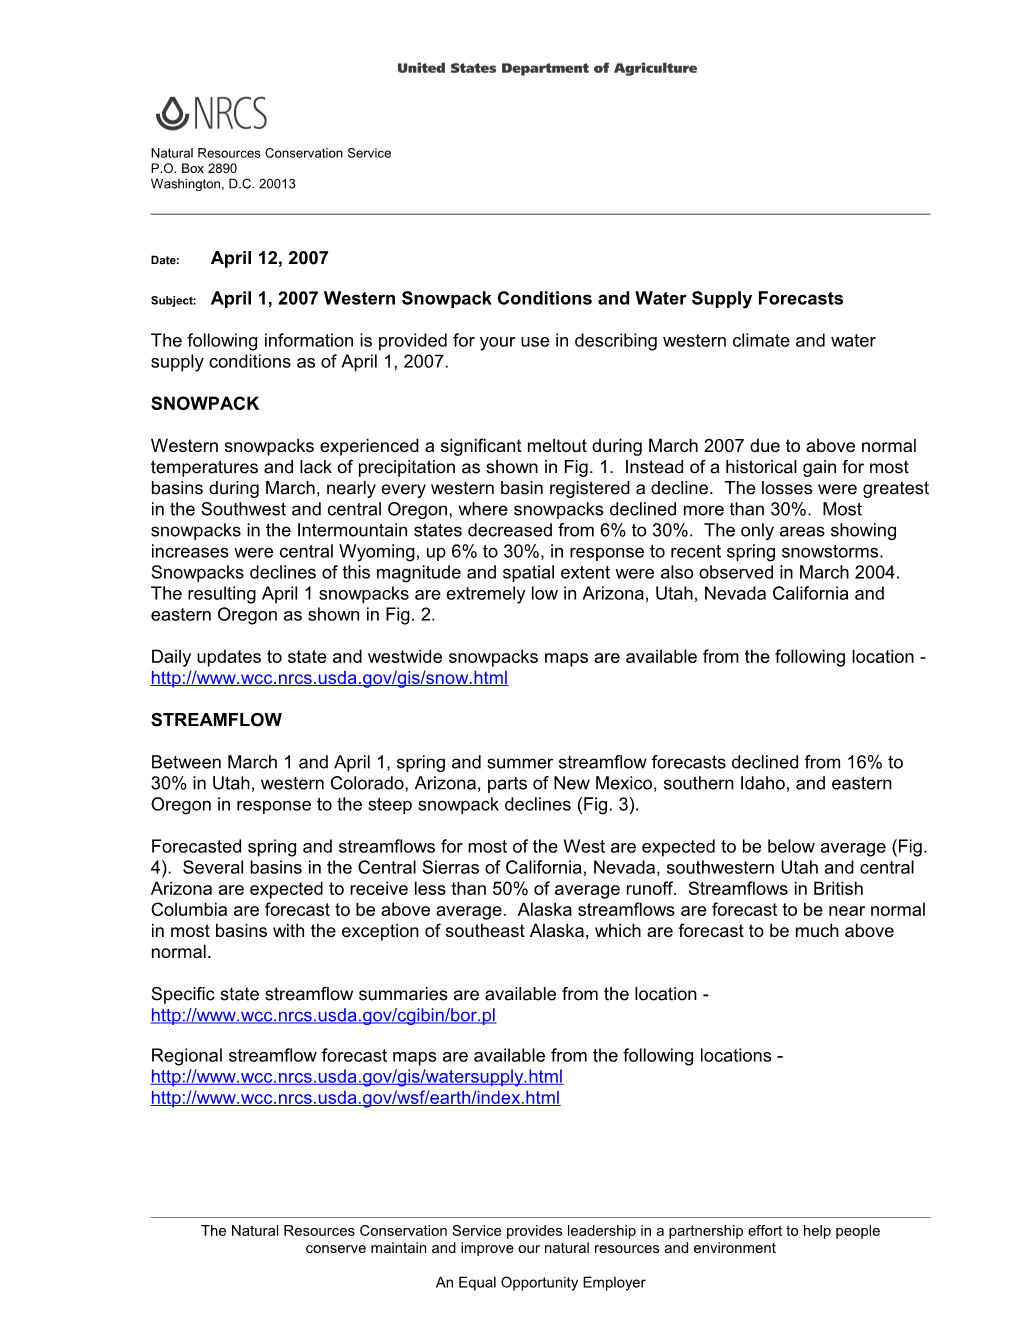 Subject:April 1, 2007Western Snowpack Conditions and Water Supply Forecasts